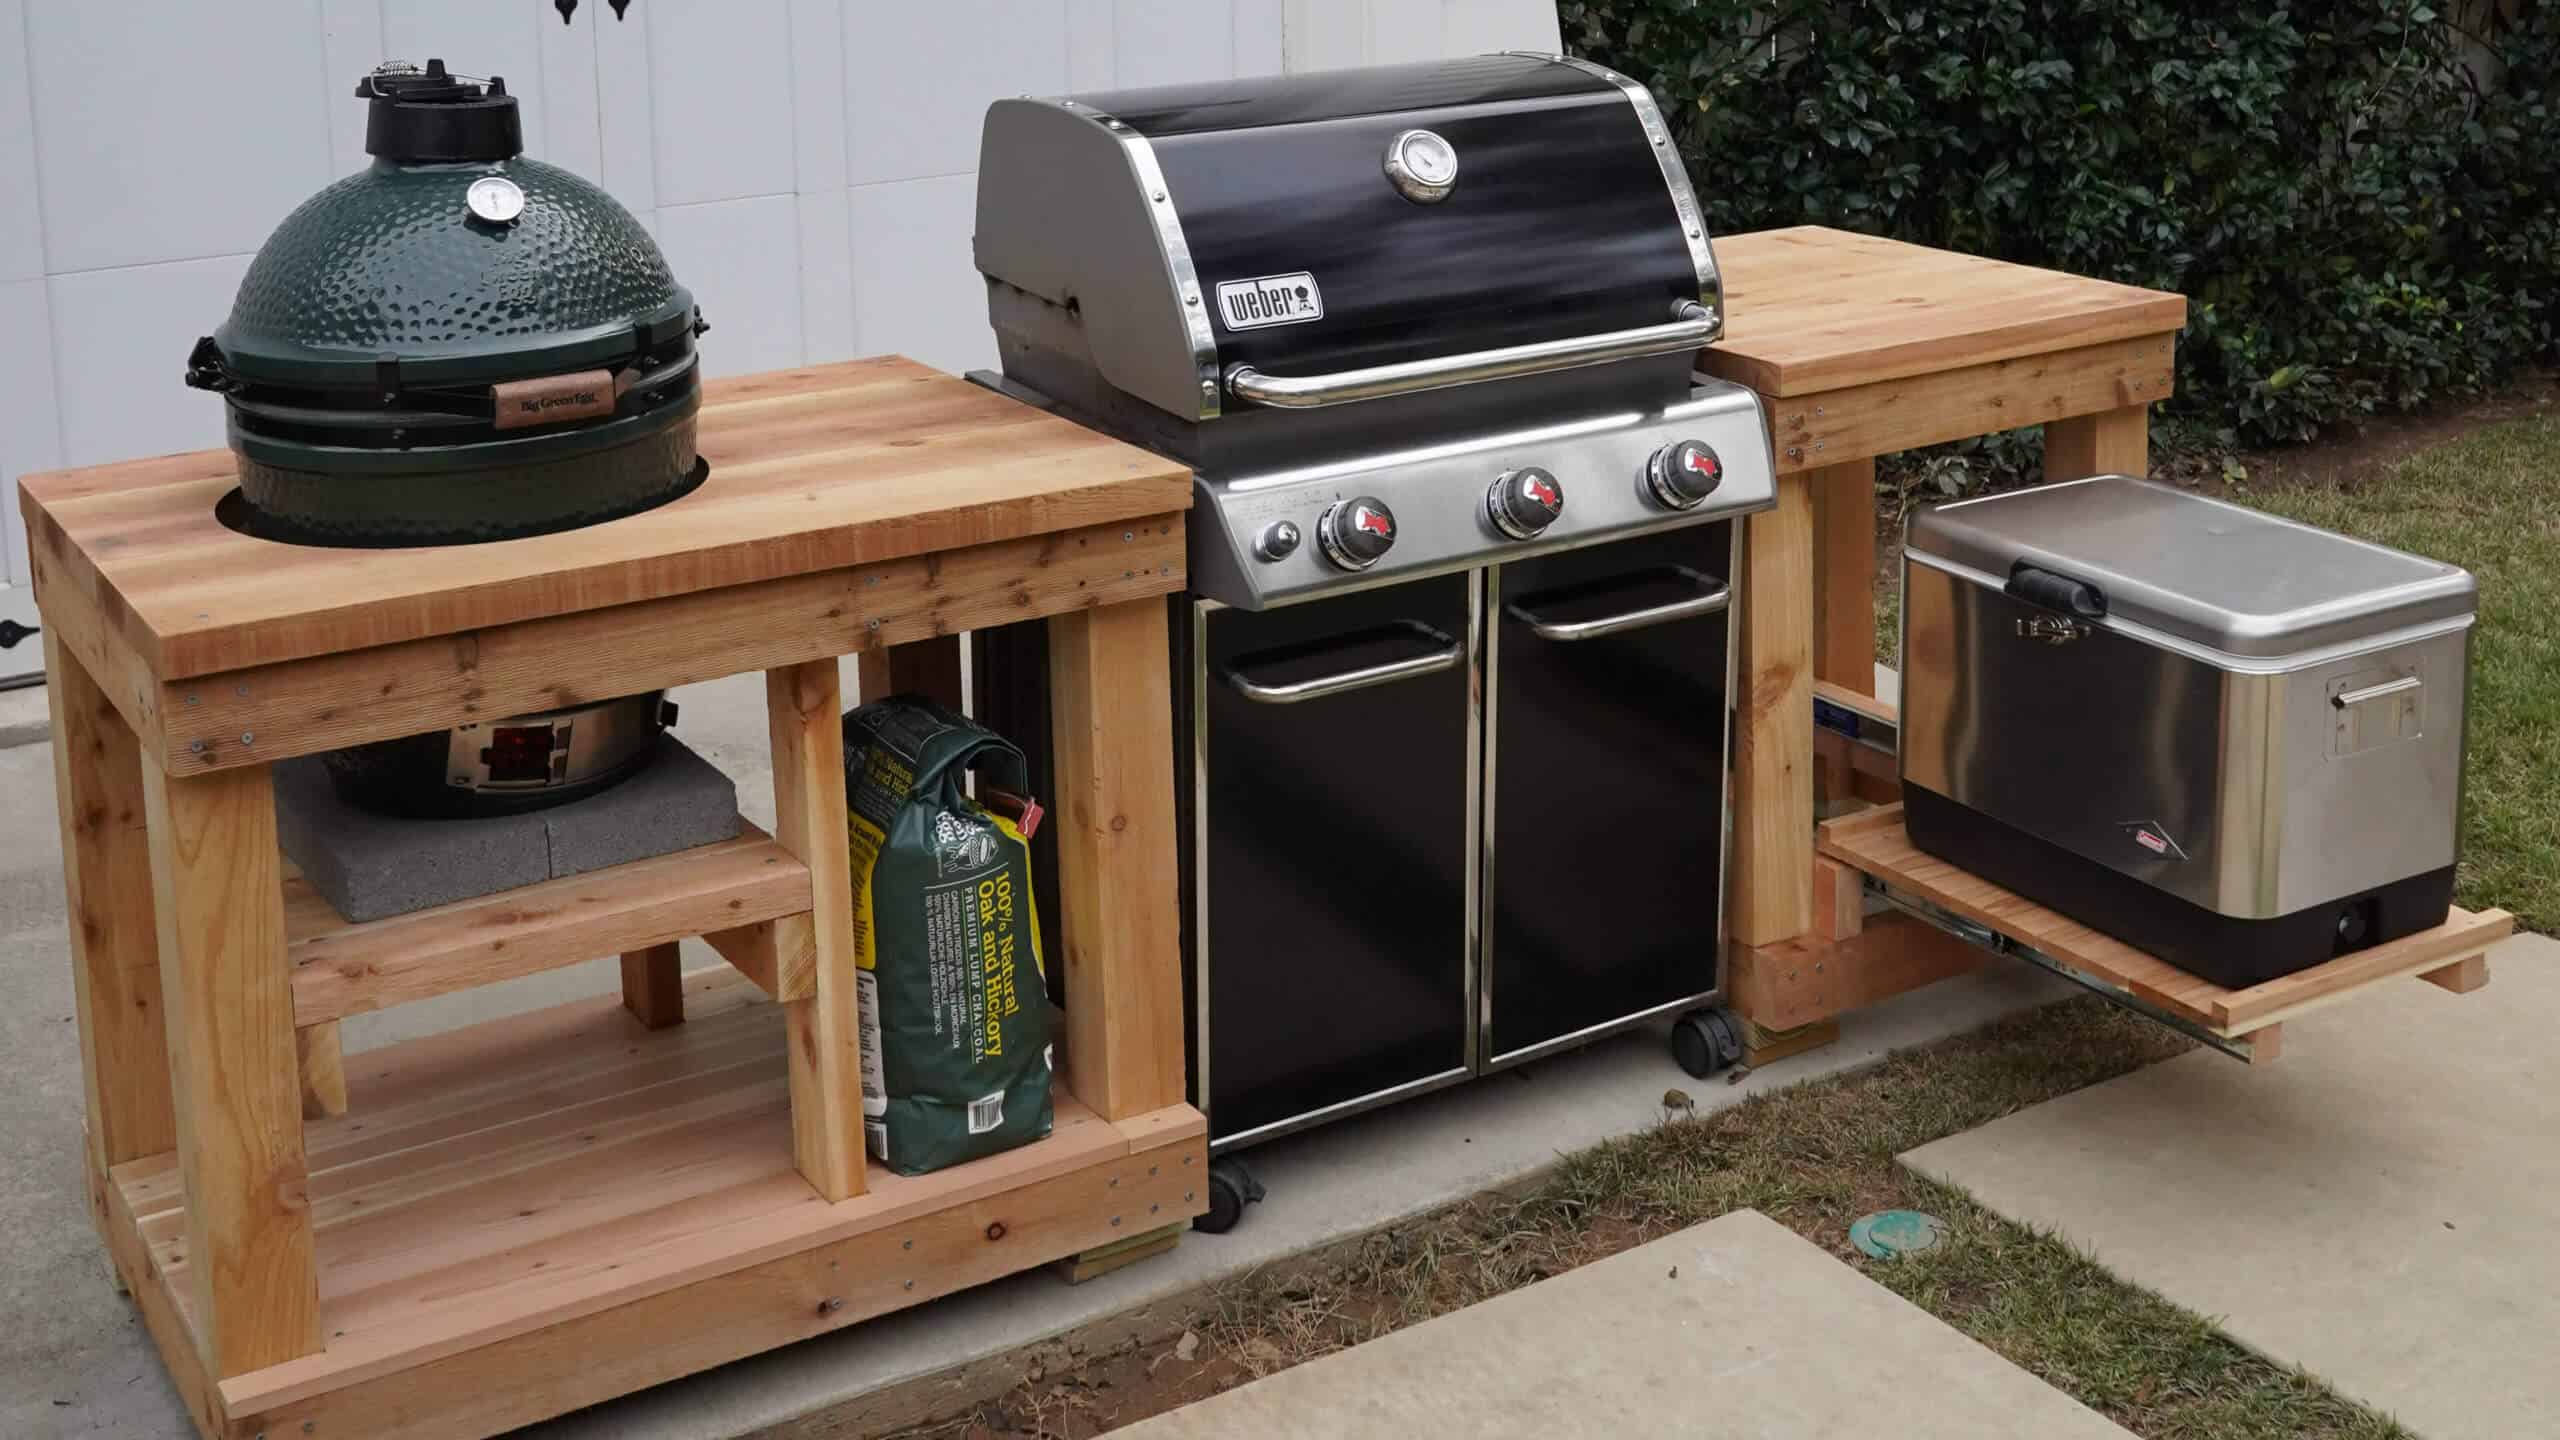 Grill set-up